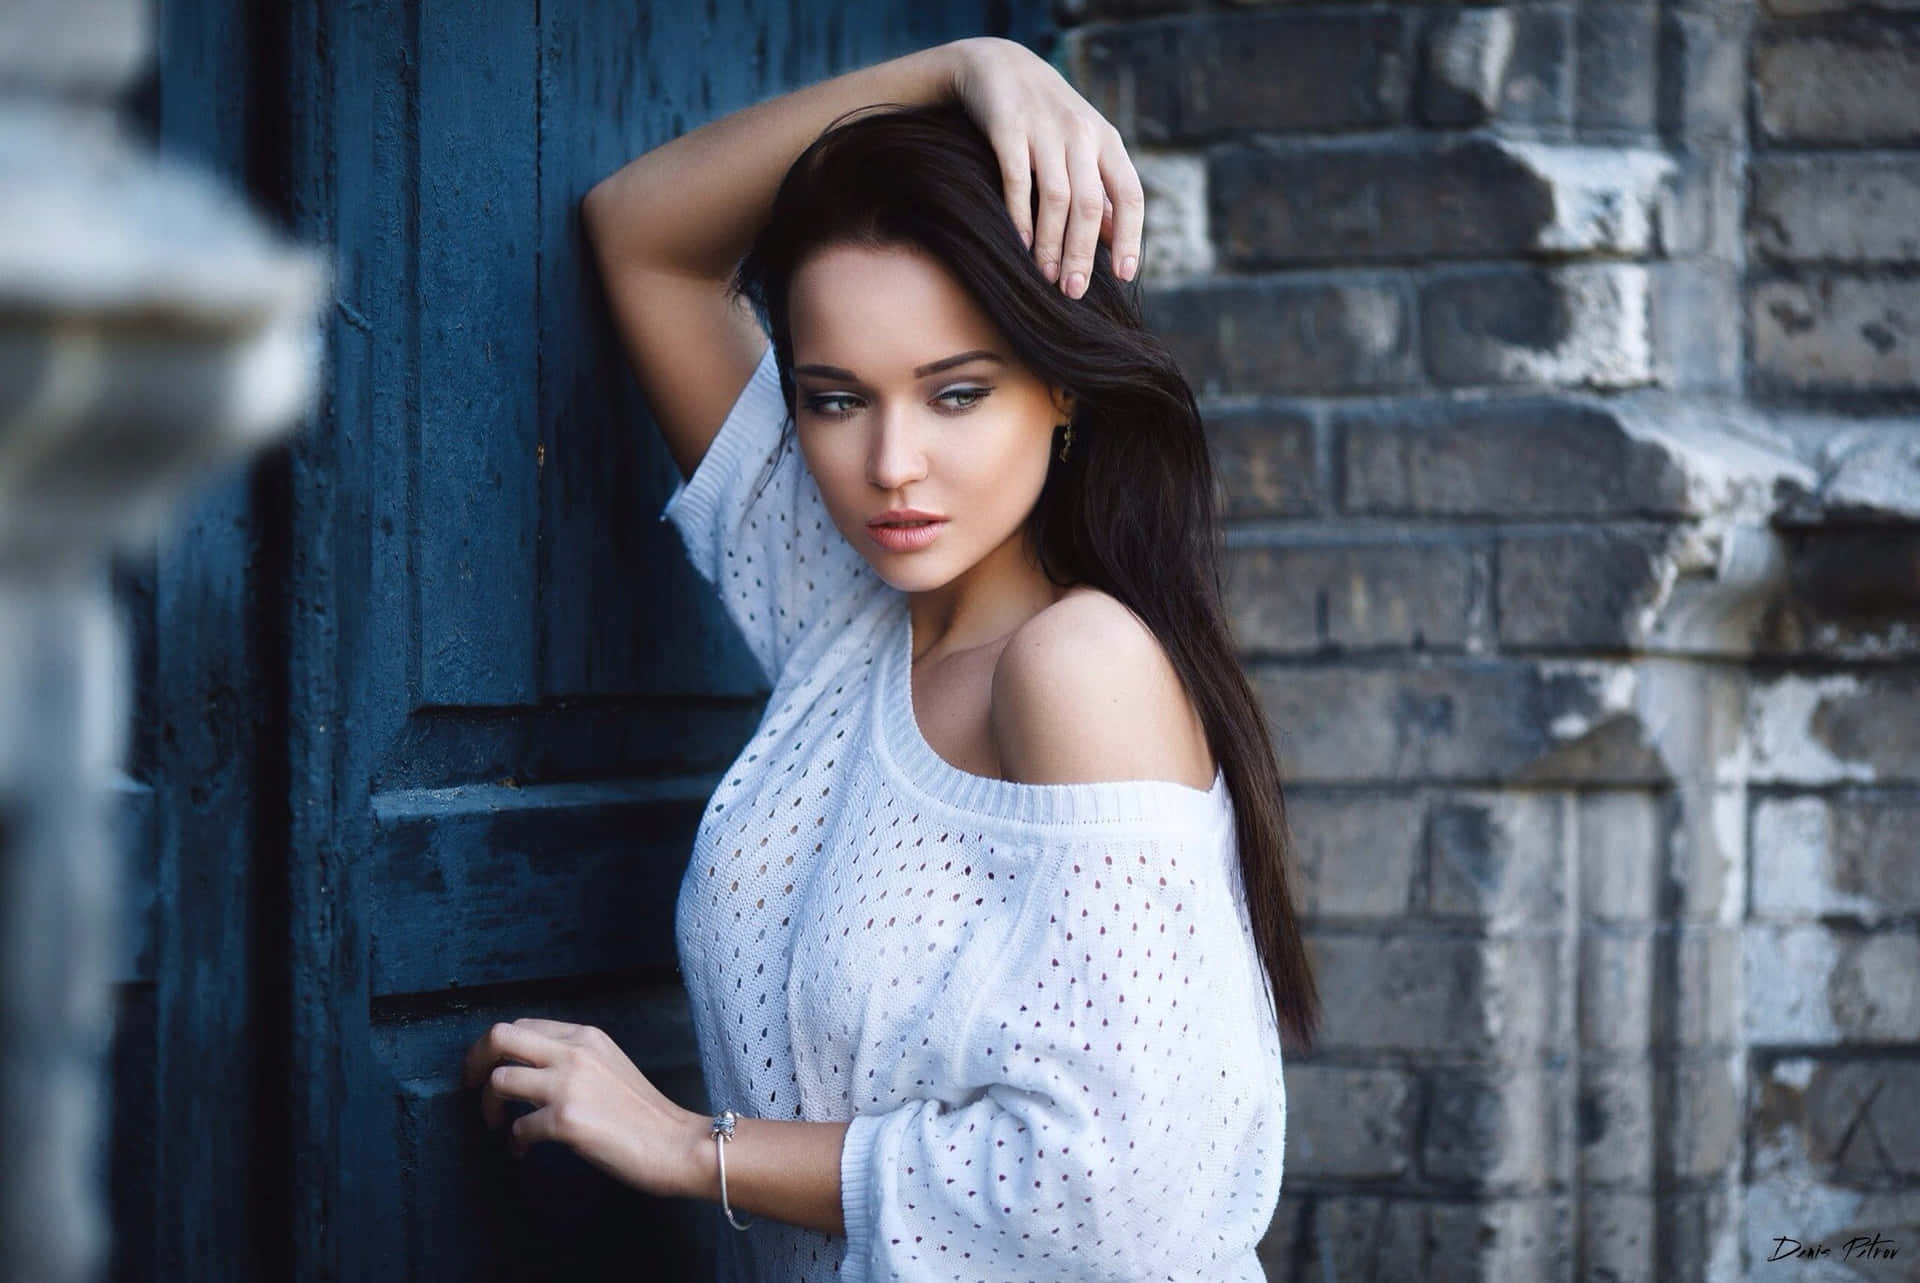 Beautiful Young Woman Posing In Front Of A Blue Door